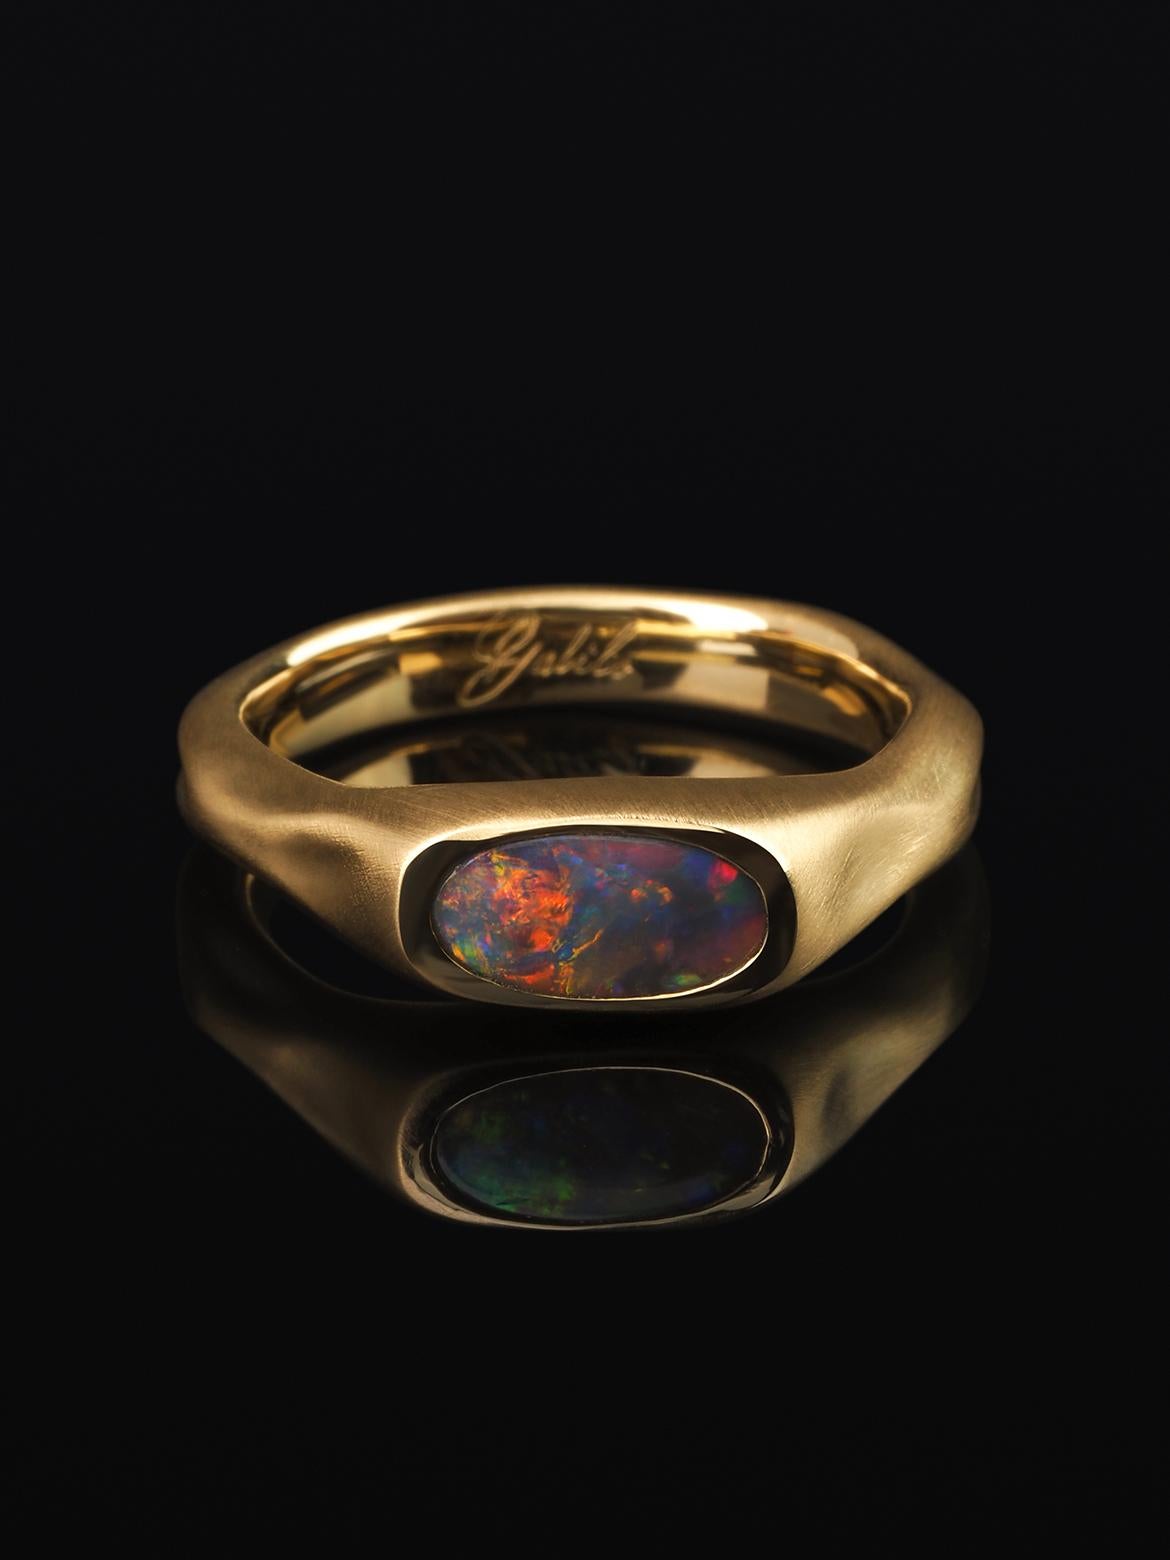 18K yellow gold ring with natural Black Opal
Opal origin - Australia
weight of the opal - 1.5 carat
opal measurements - 0.2 х 0.34 in / 5 х 9 mm
weight of the ring - 9 grams
ring size - 9 US
